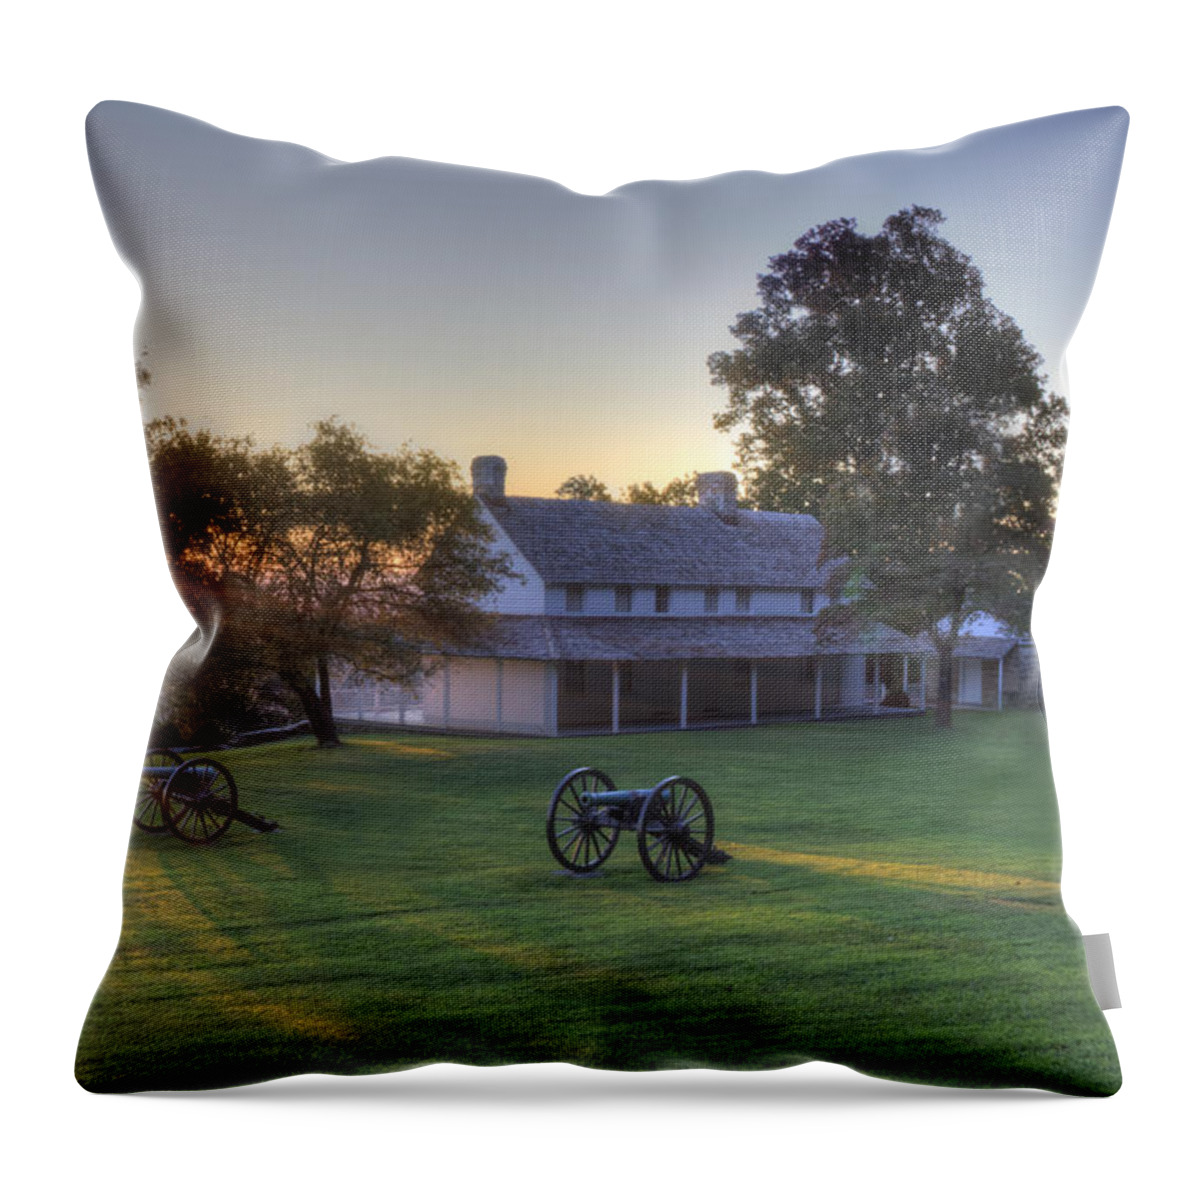 Battle Throw Pillow featuring the photograph Cravens House by David Troxel